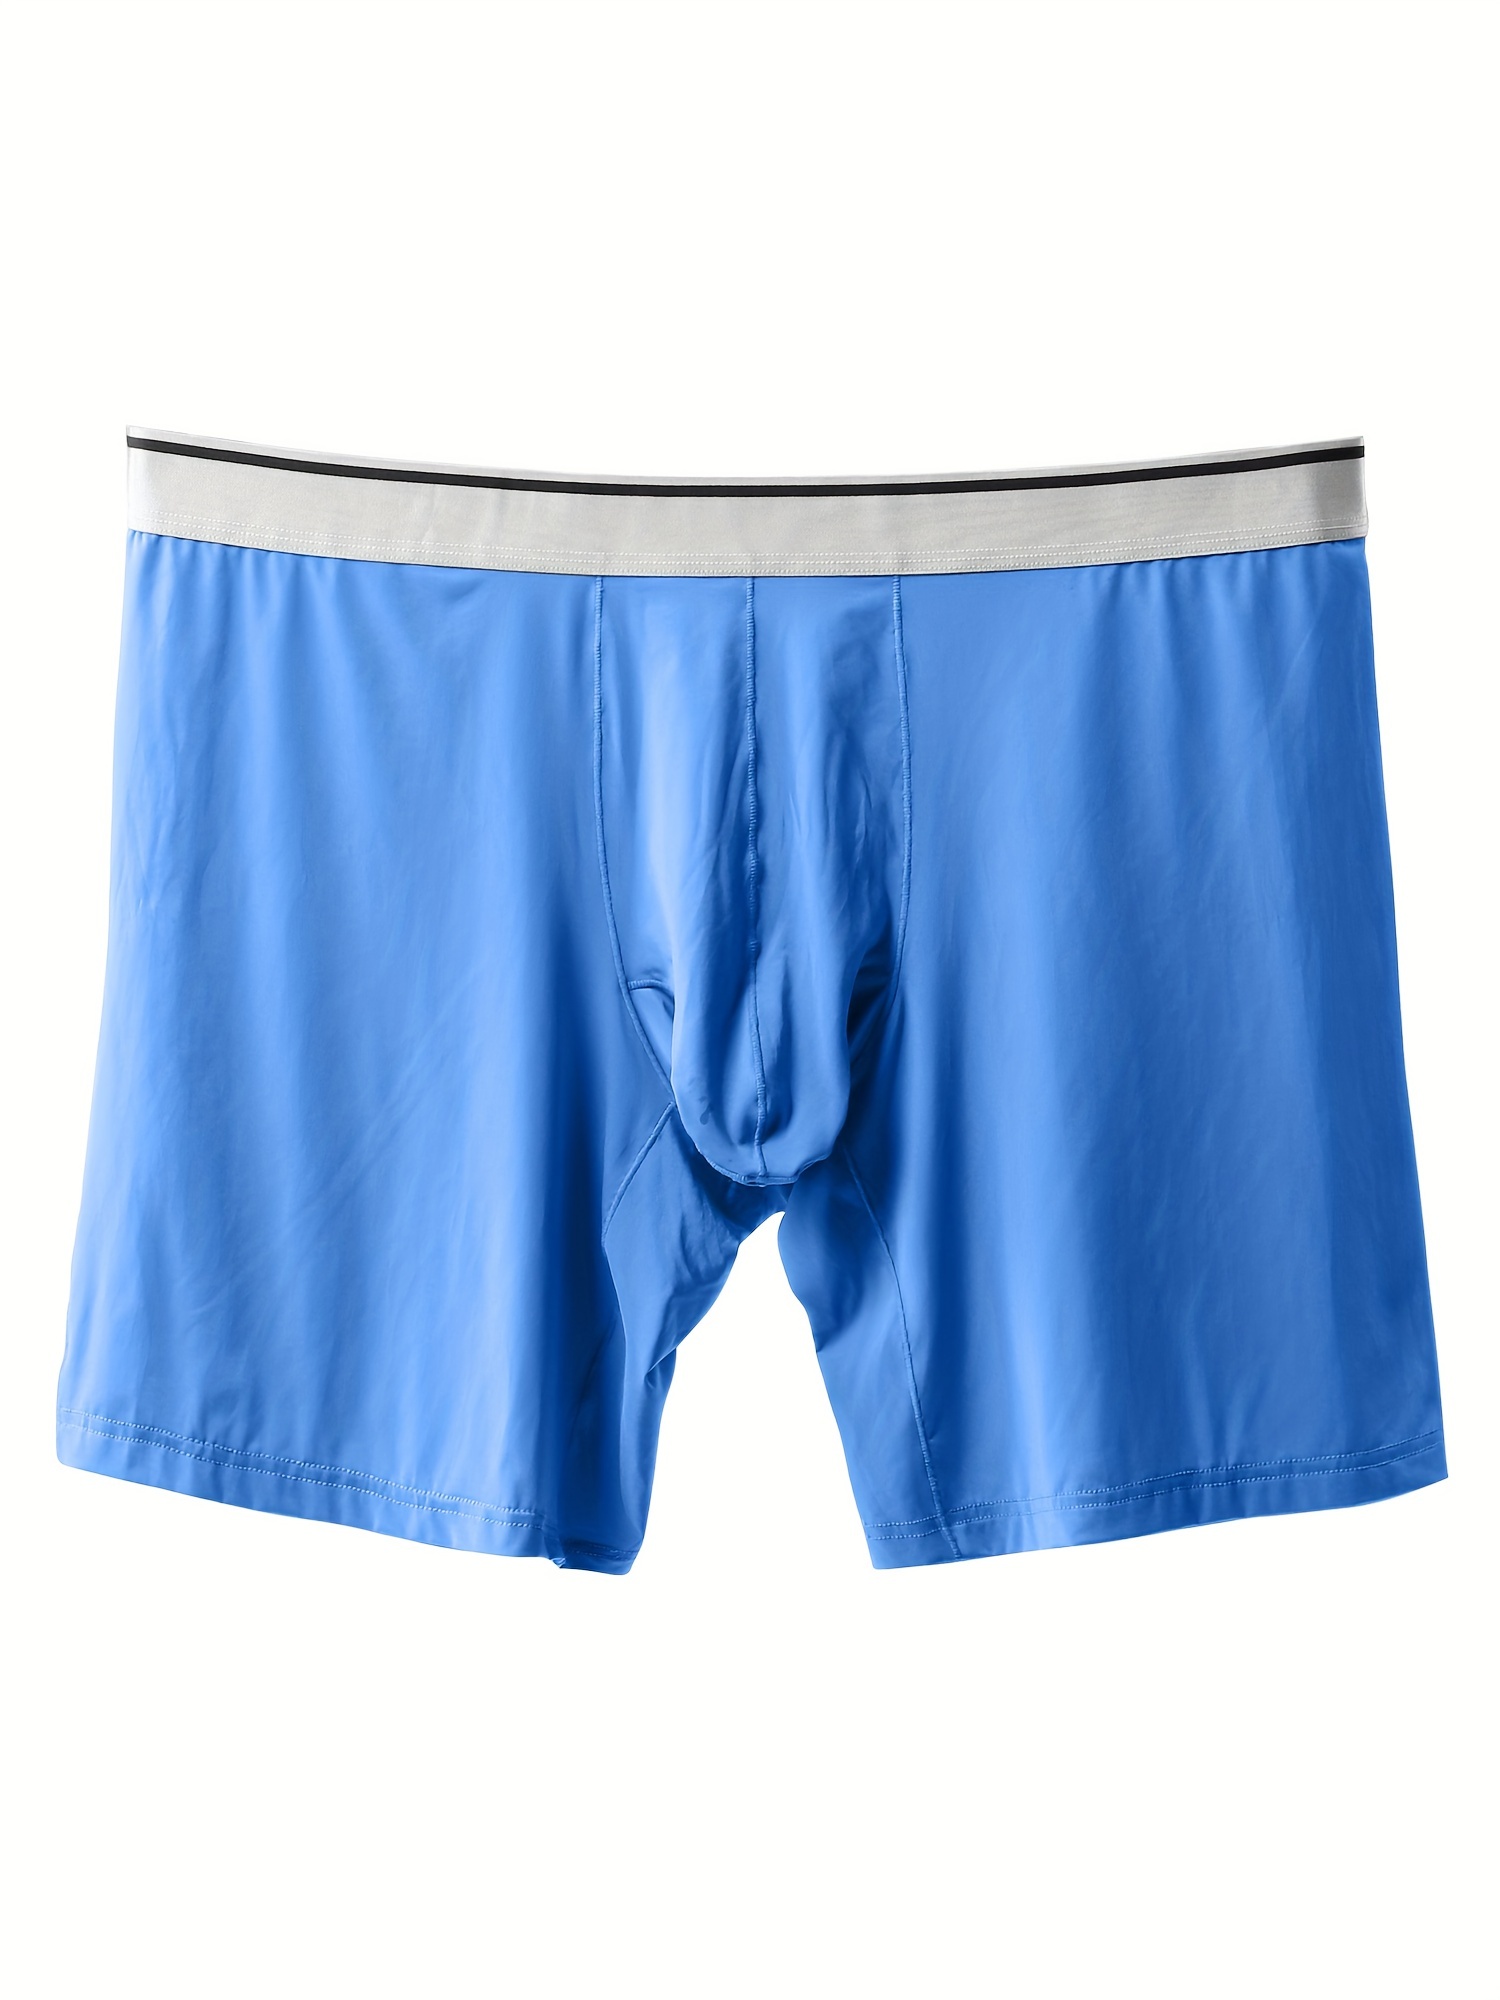 Soft male elephant underwear For Comfort 